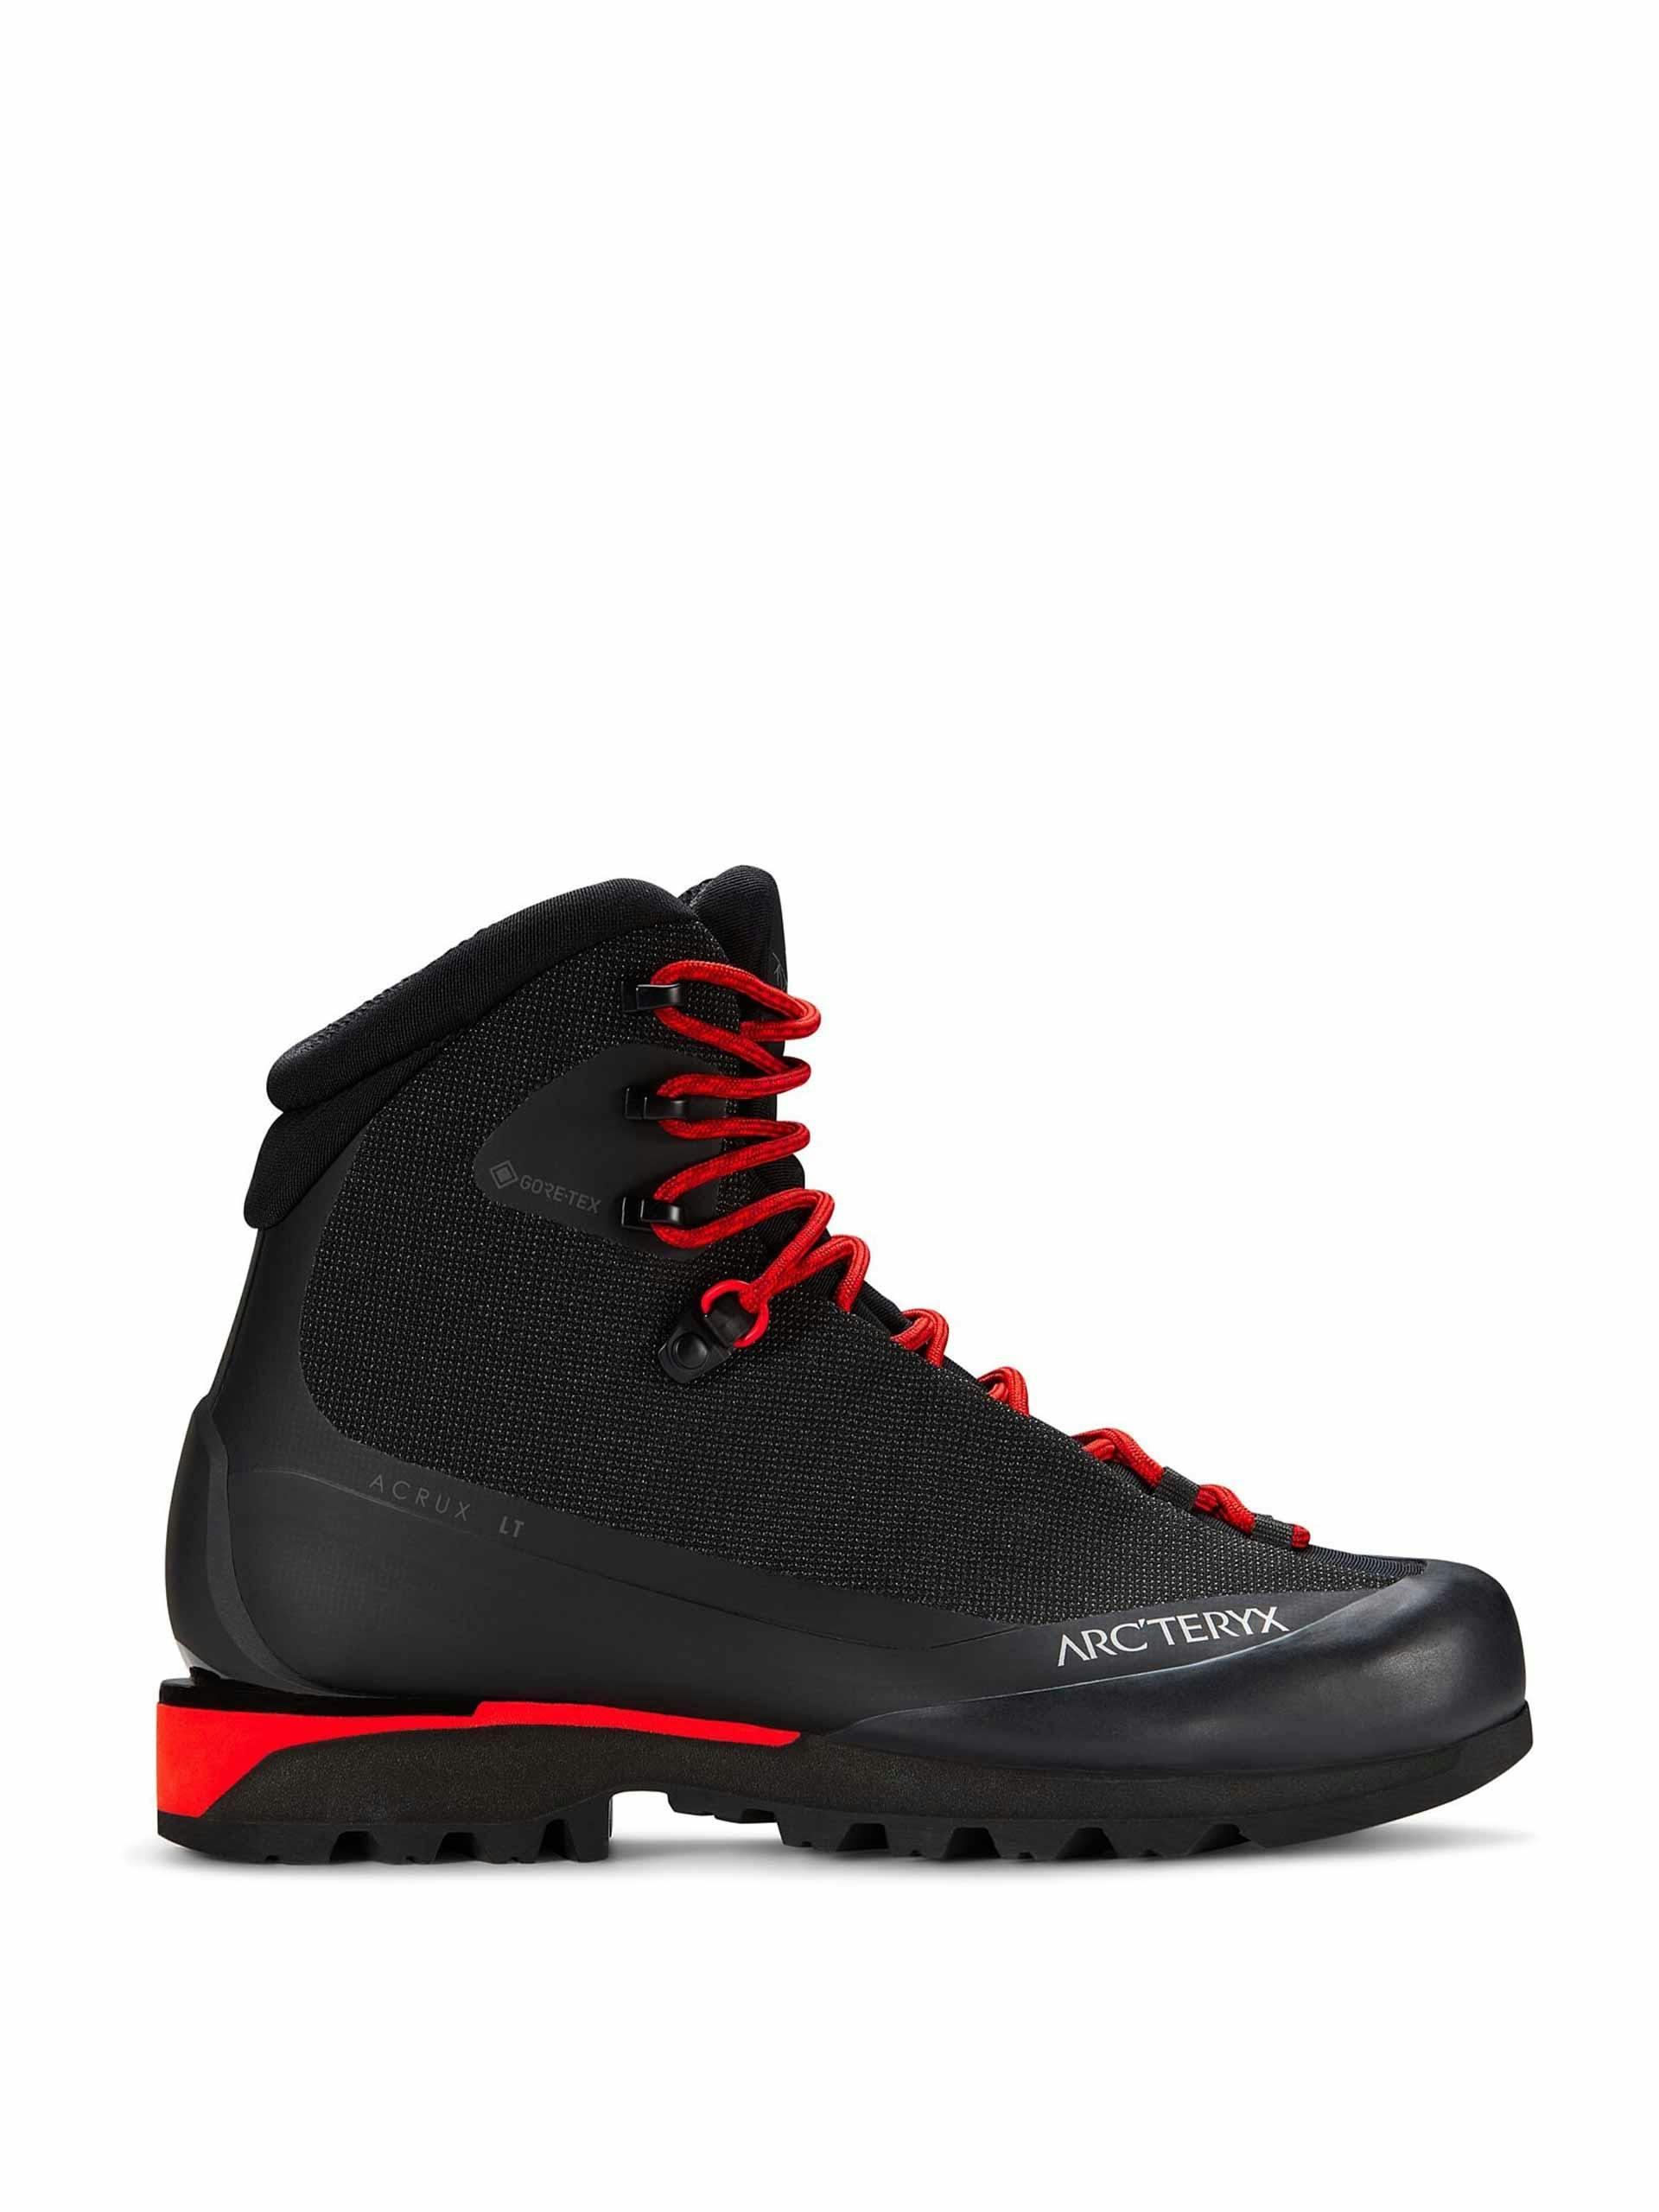 GORE-TEX mountaineering boots